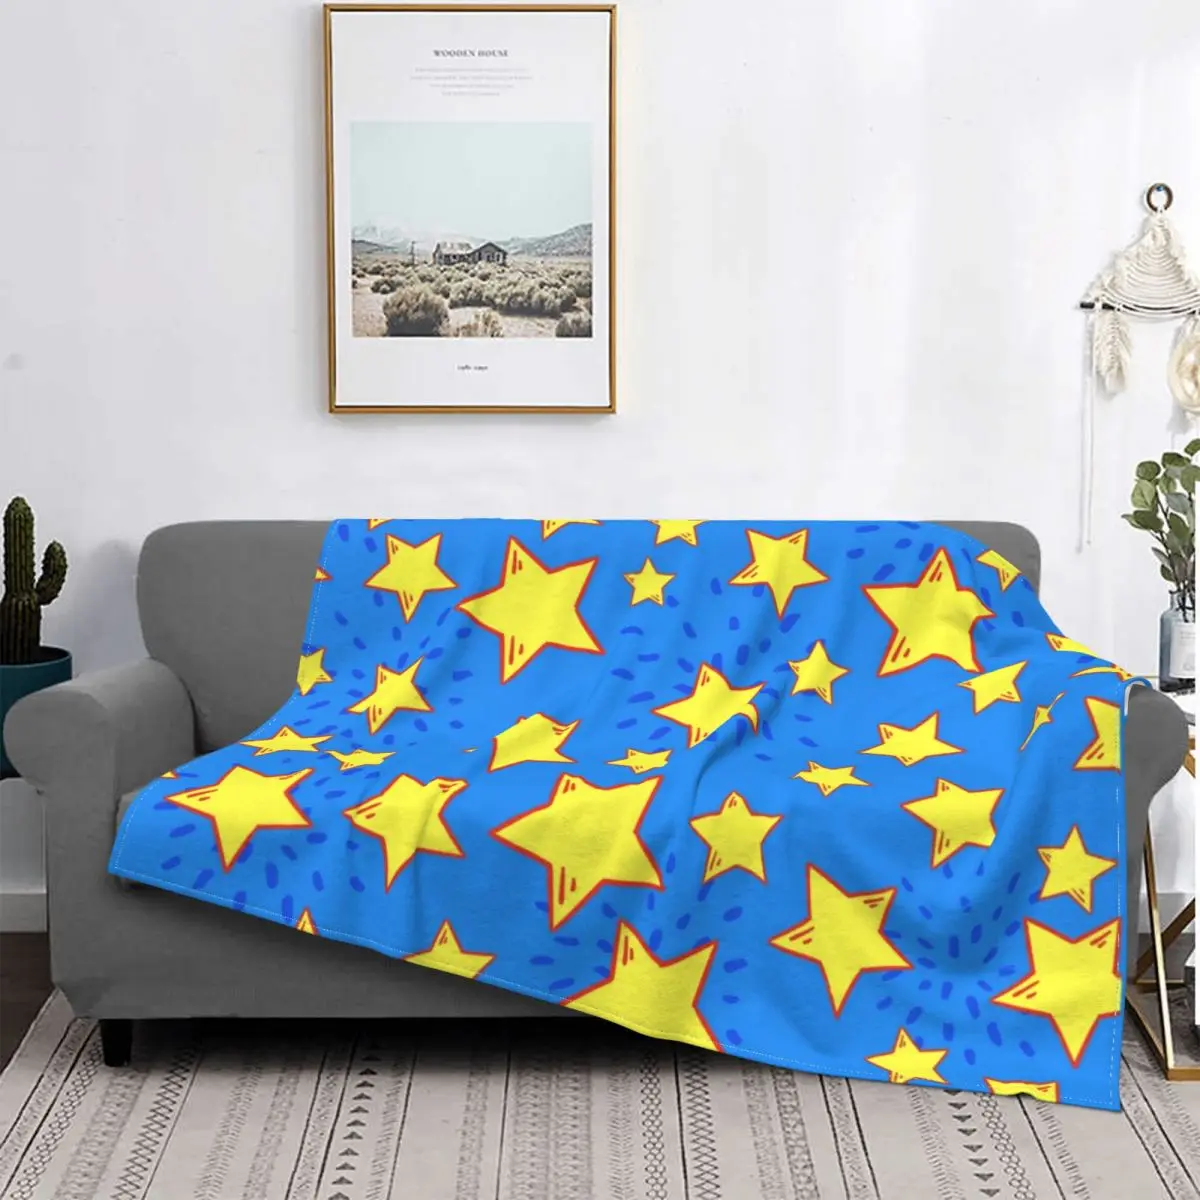 

Stars Pattern Comic Starry Bright Blanket Sky Twinkling Plush Warm Super Soft Flannel Fleece Throw Blanket For Bedding Bed Cover